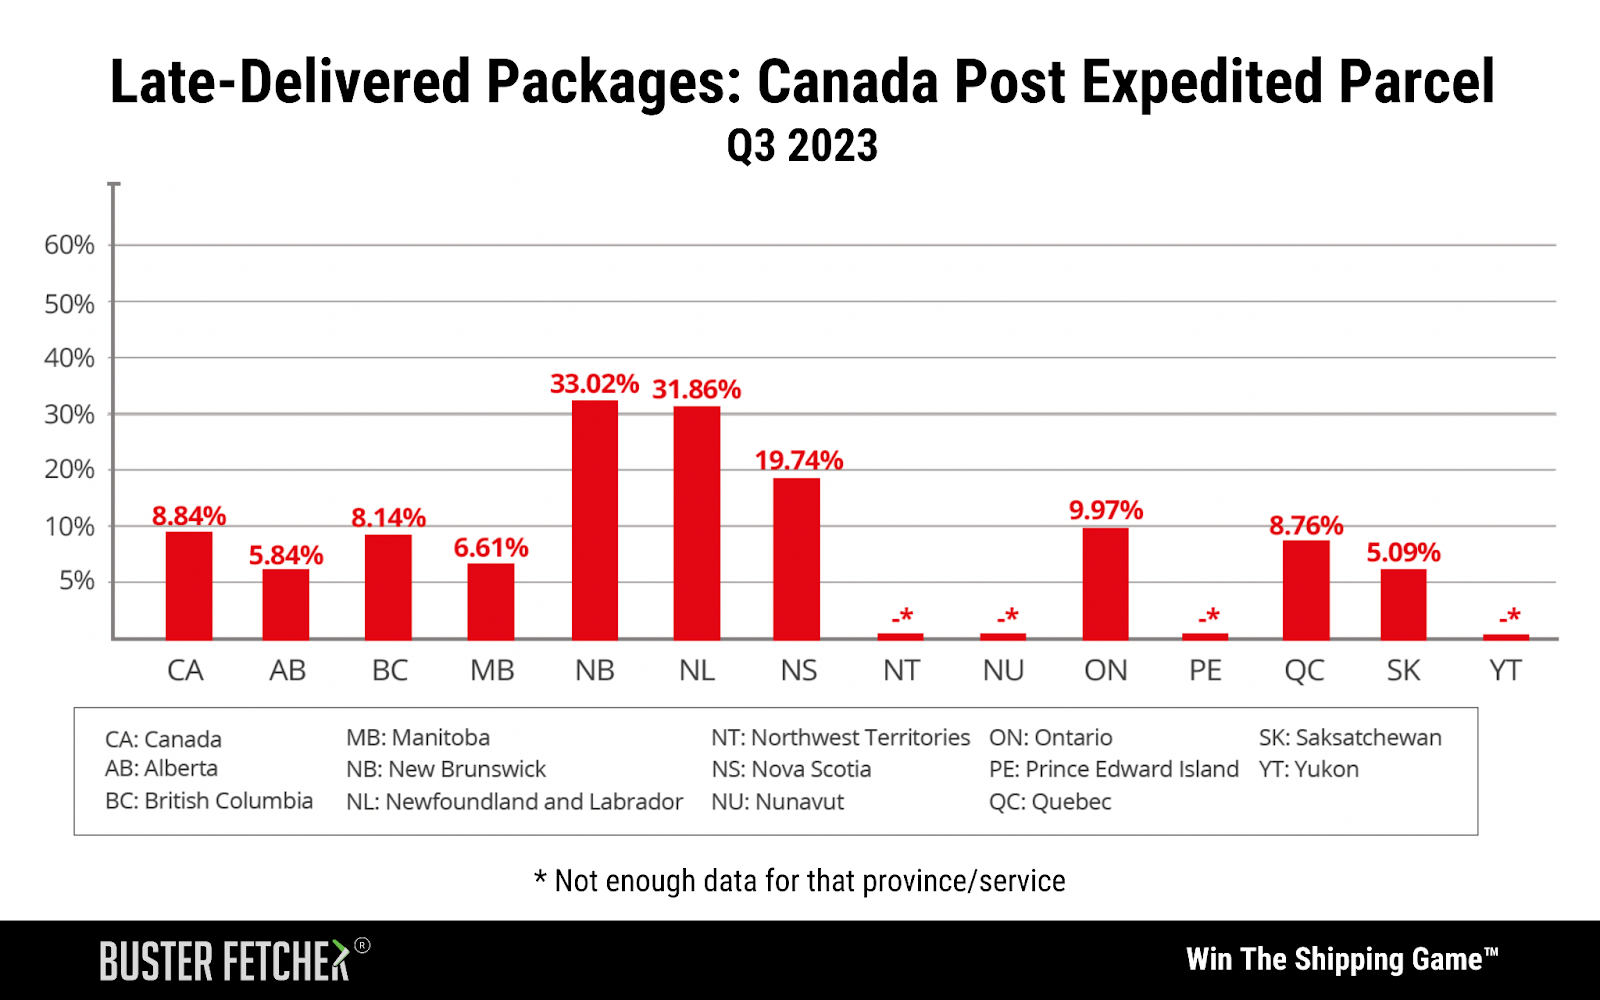 Late-Delivered Packages: Canada Post Expedited Parcel